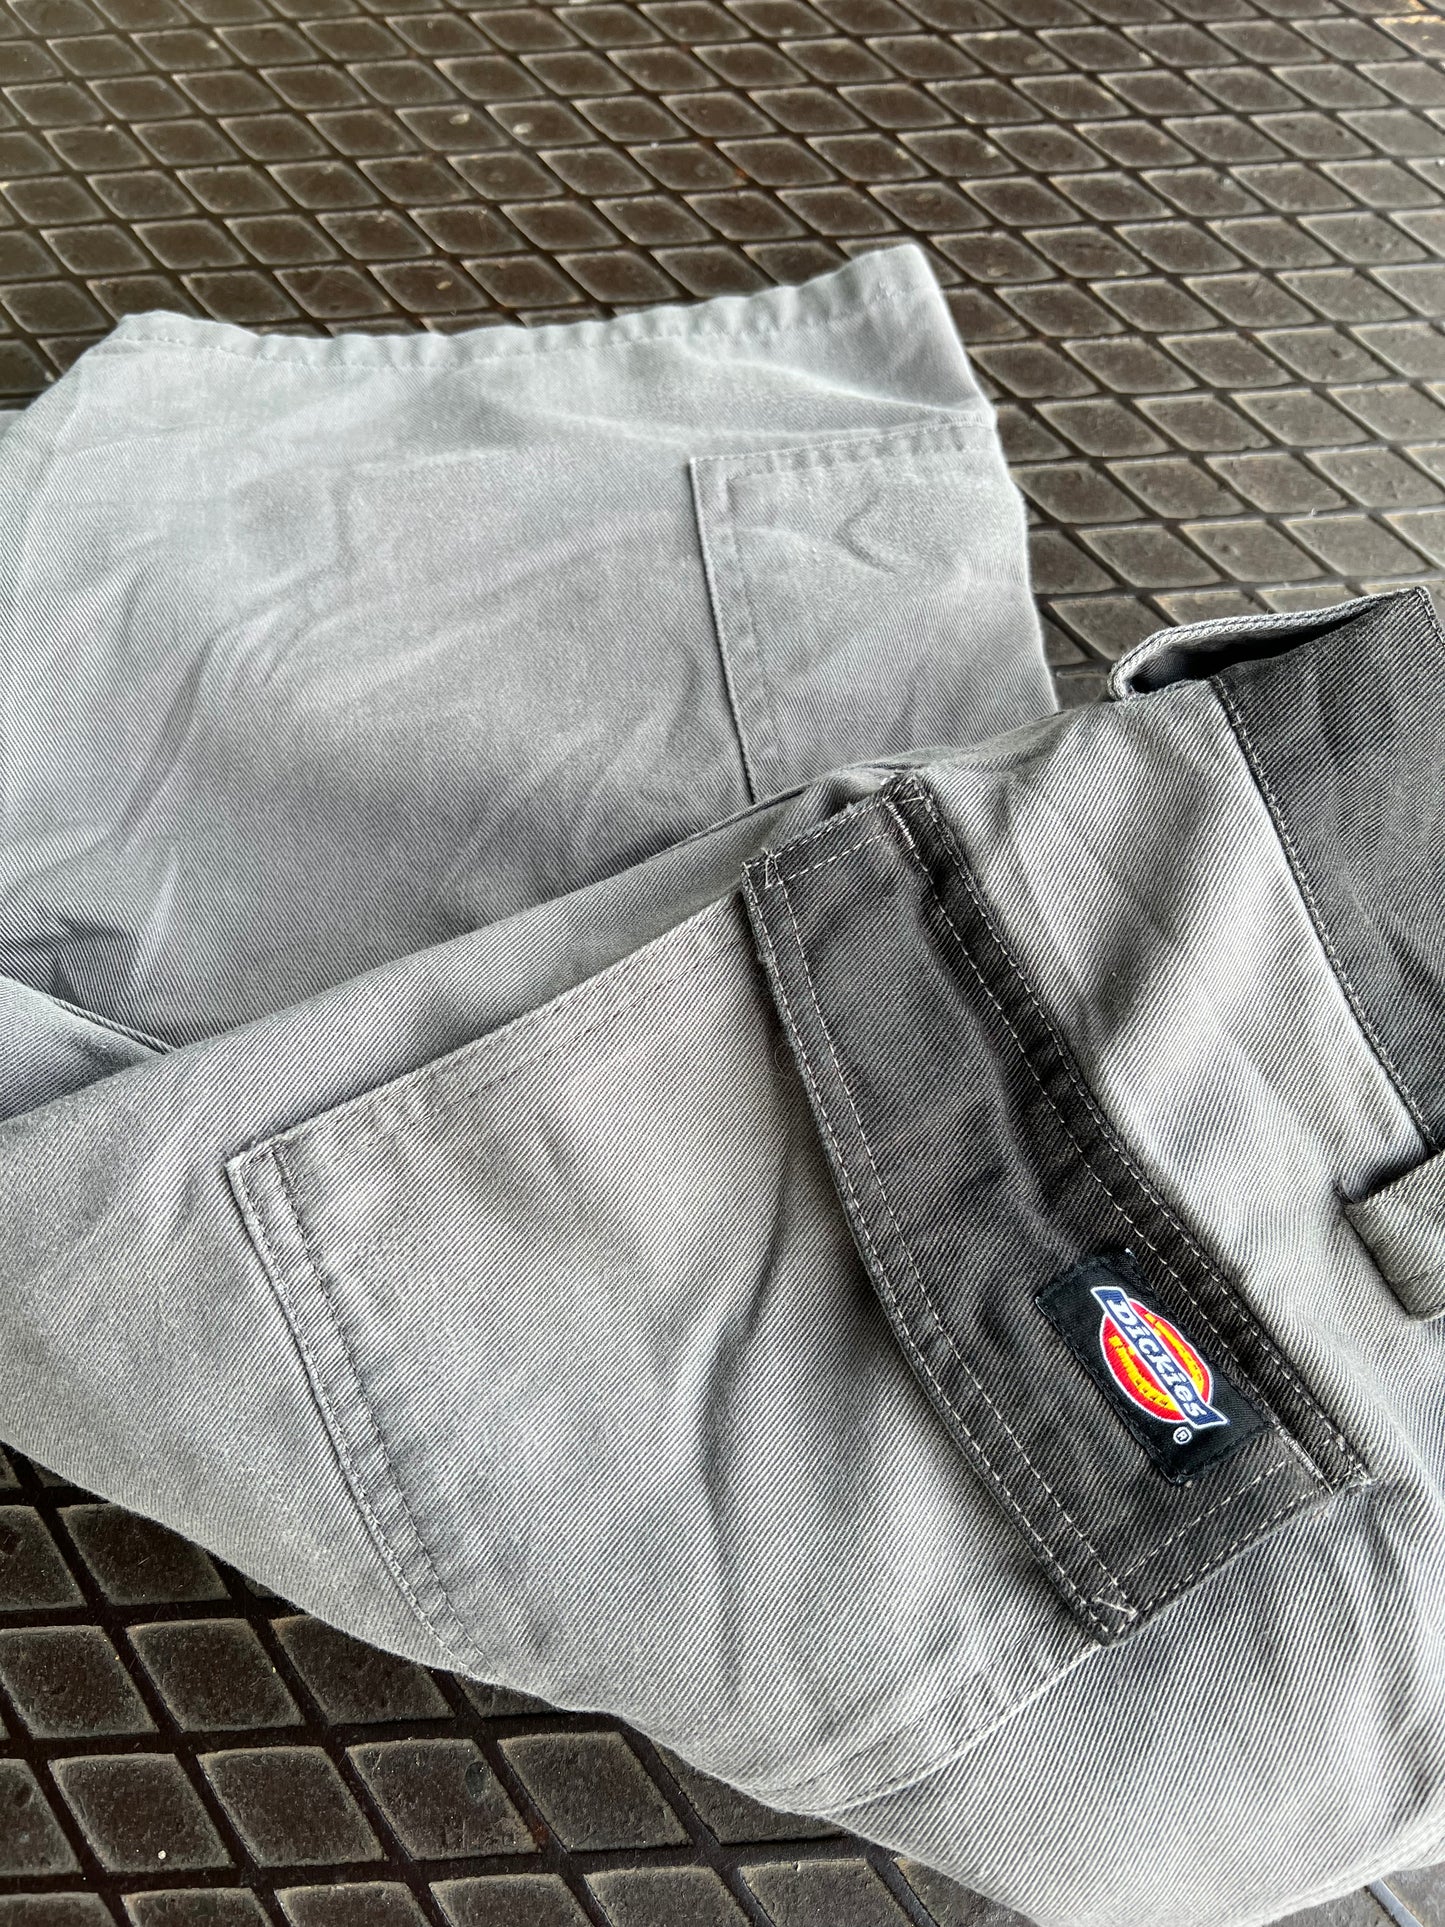 30 - Dickies Grey/Black Accents Cargo Shorts